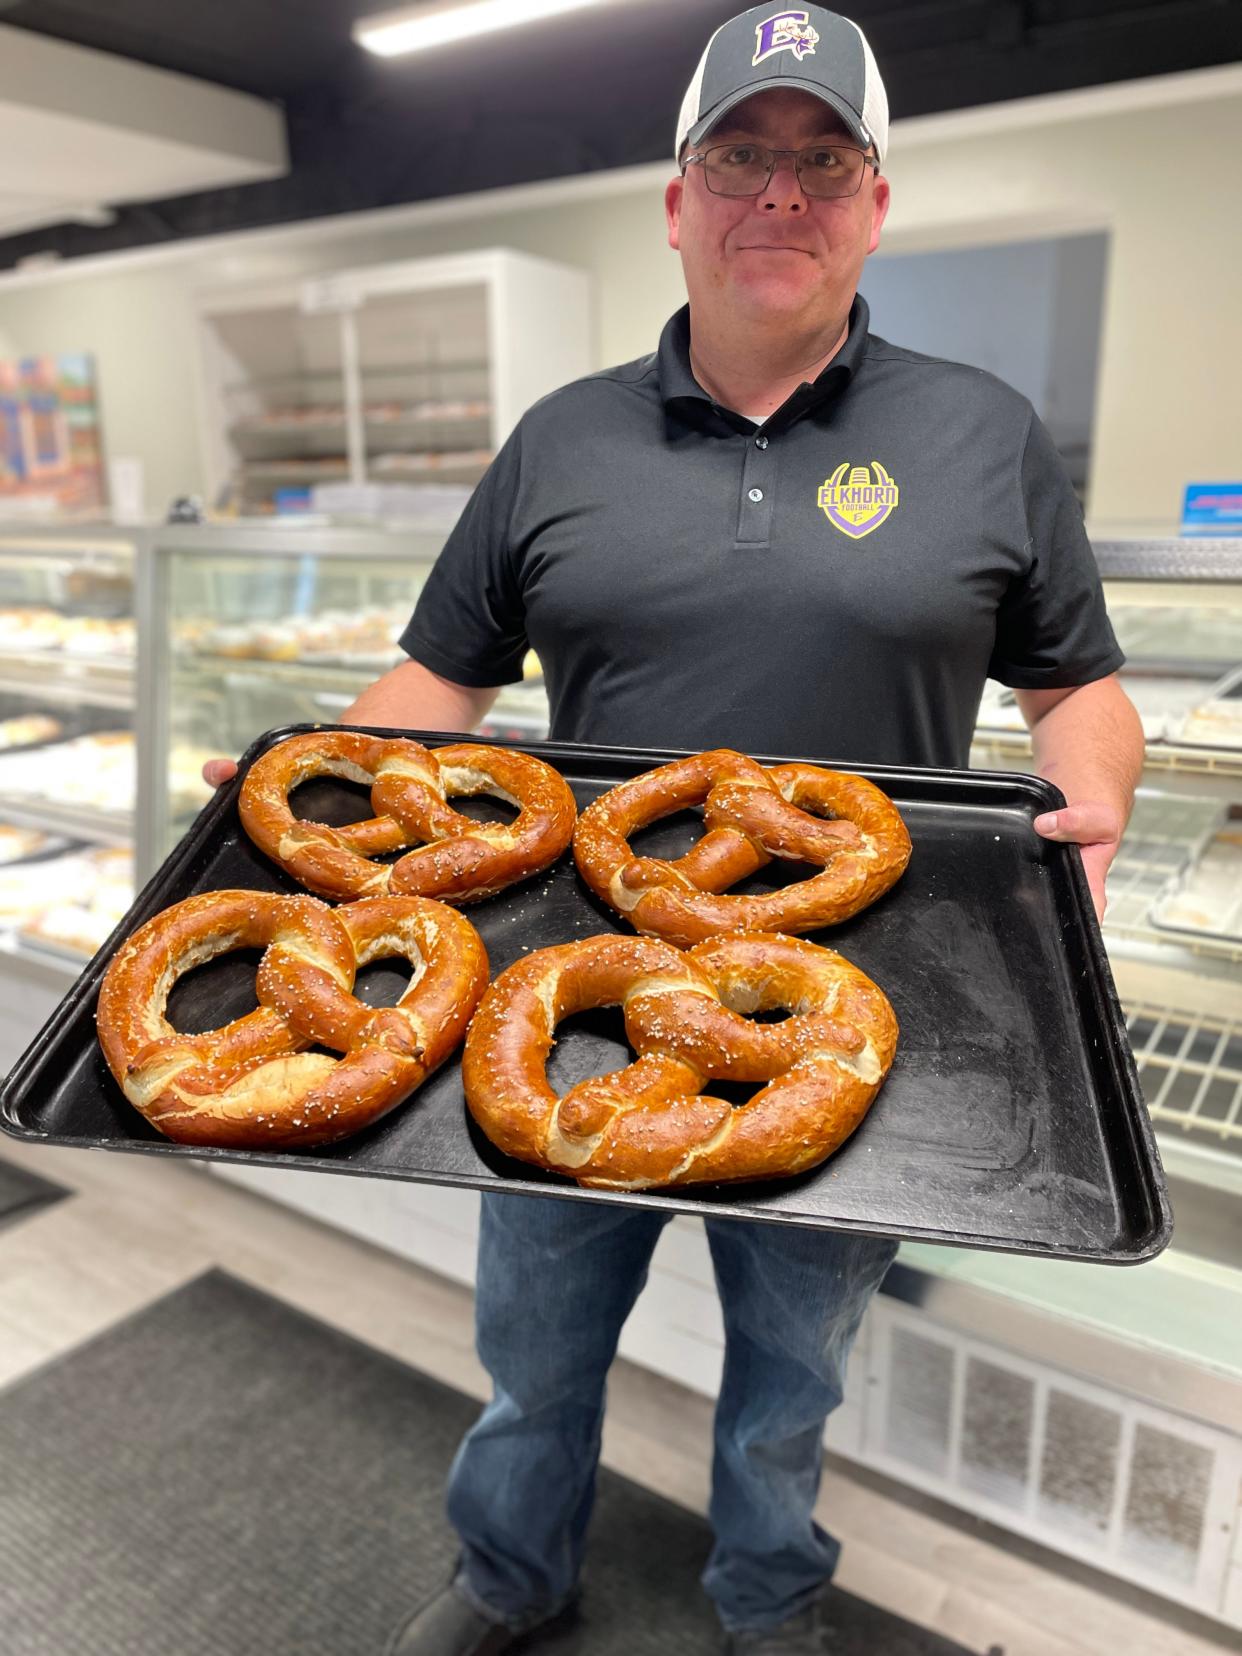 Baker Meister employee Rudolph Krause holds a tray of giant pretzels, which the Elkhorn bakery sells by the hundreds every week.